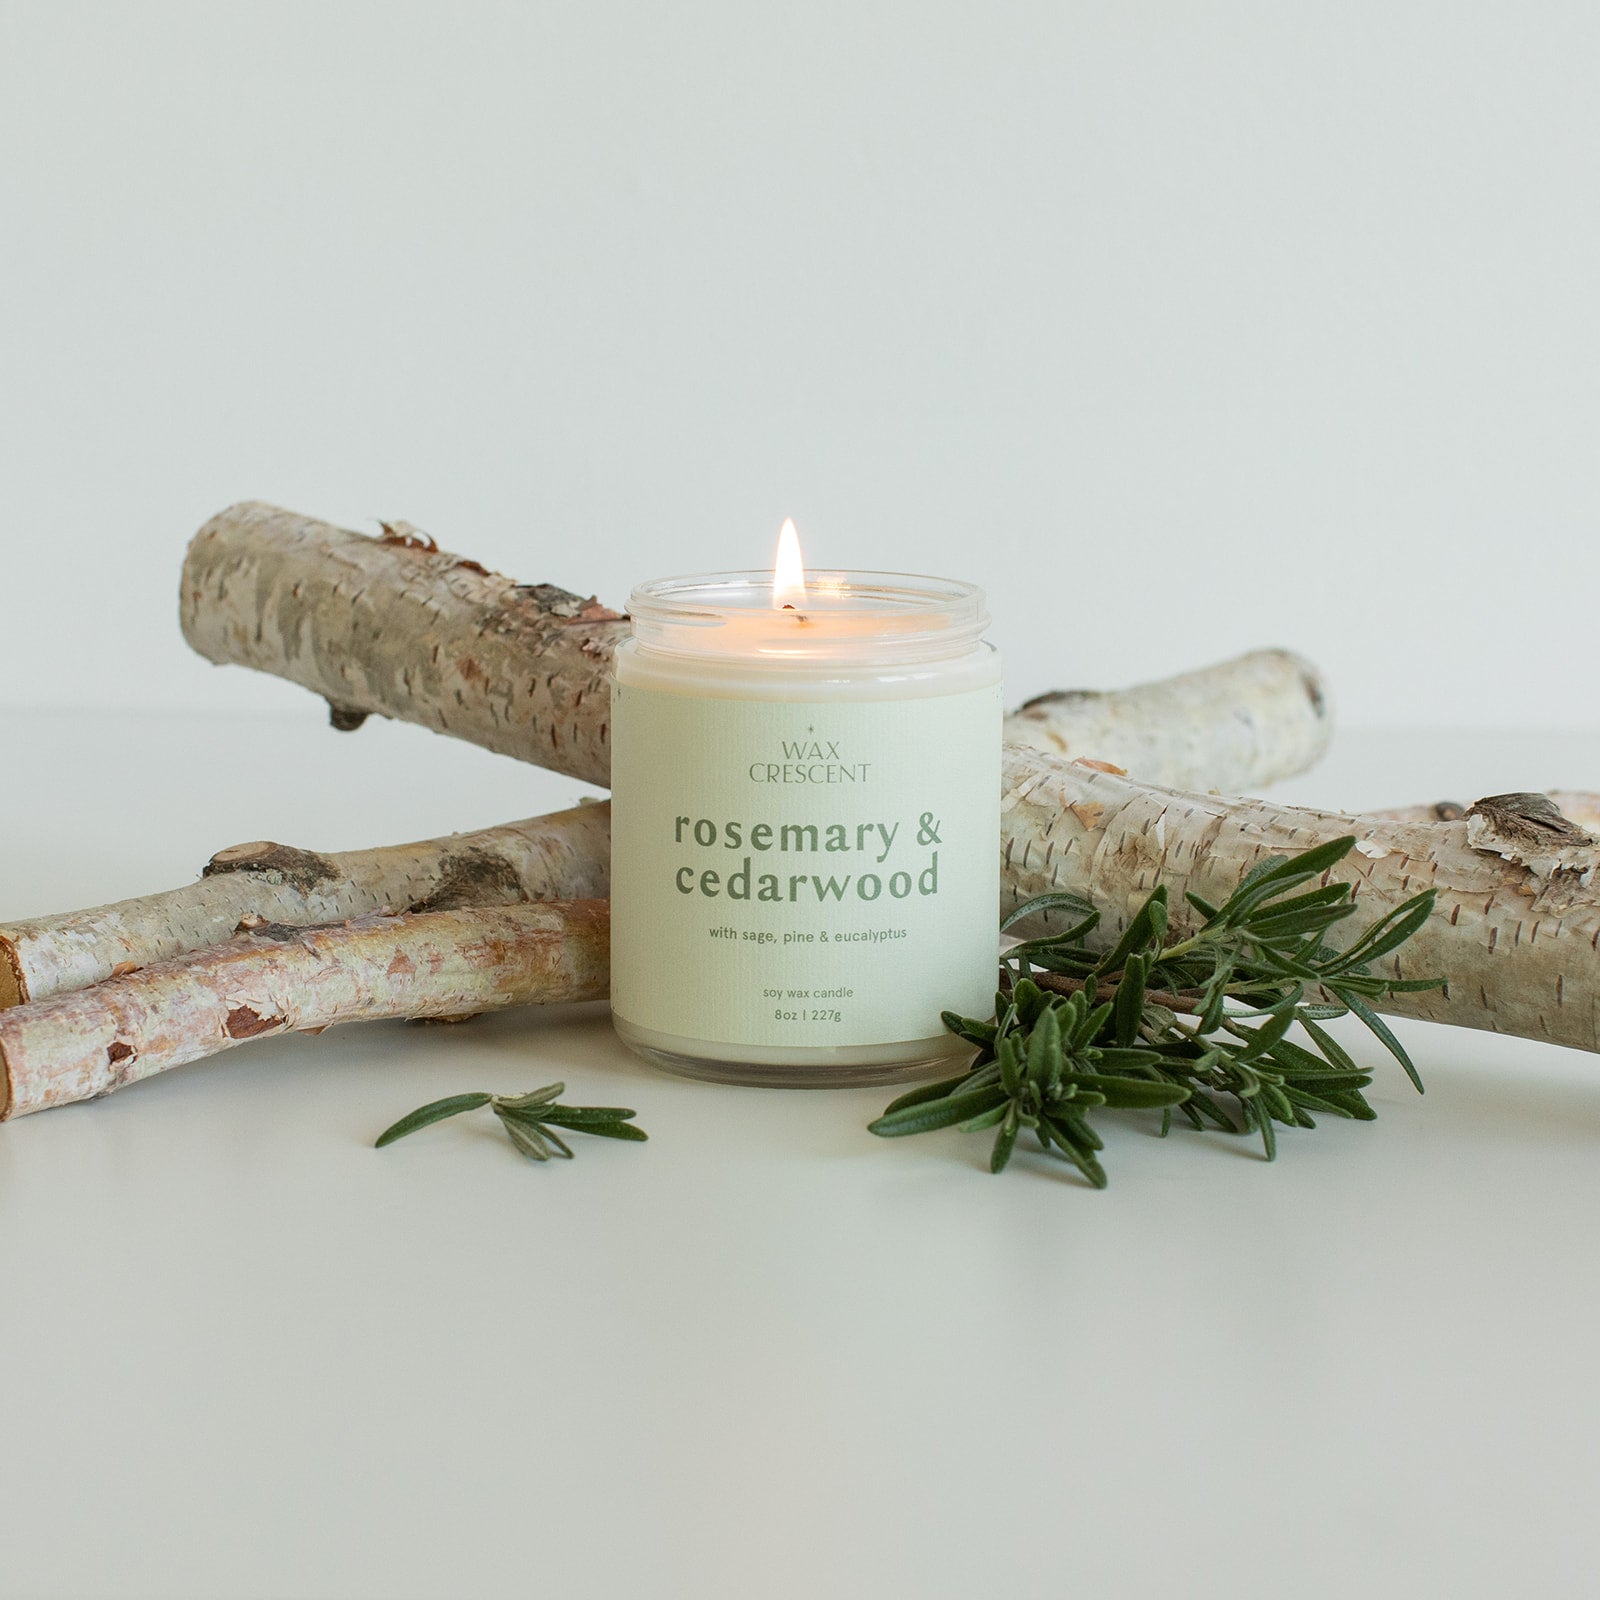 Wax Crescent soy wax candle made with non-toxic fragrance and natural essential oils. 